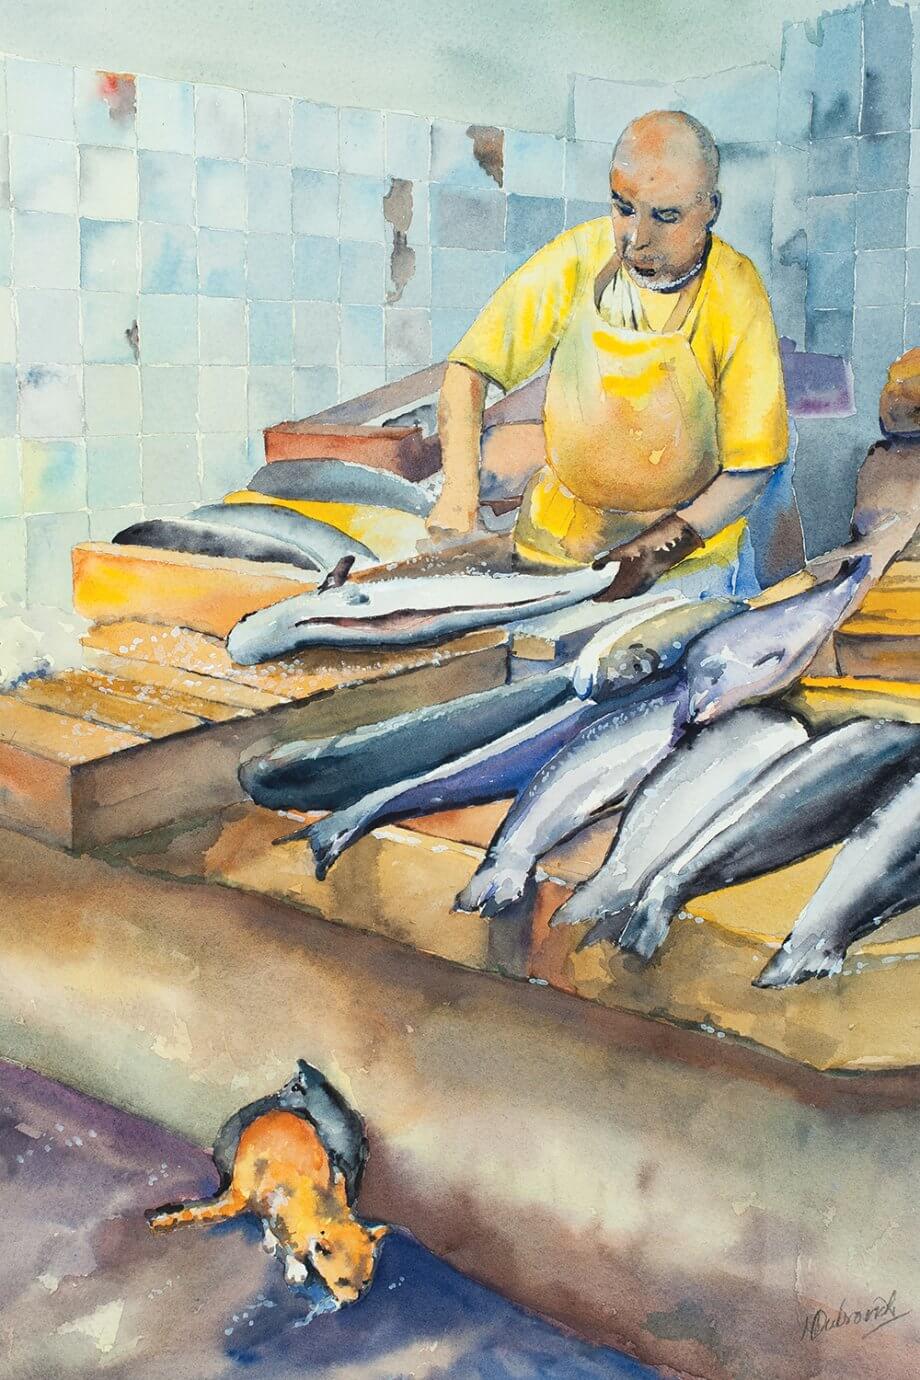 helen dubrovich watercolor painting - fish market